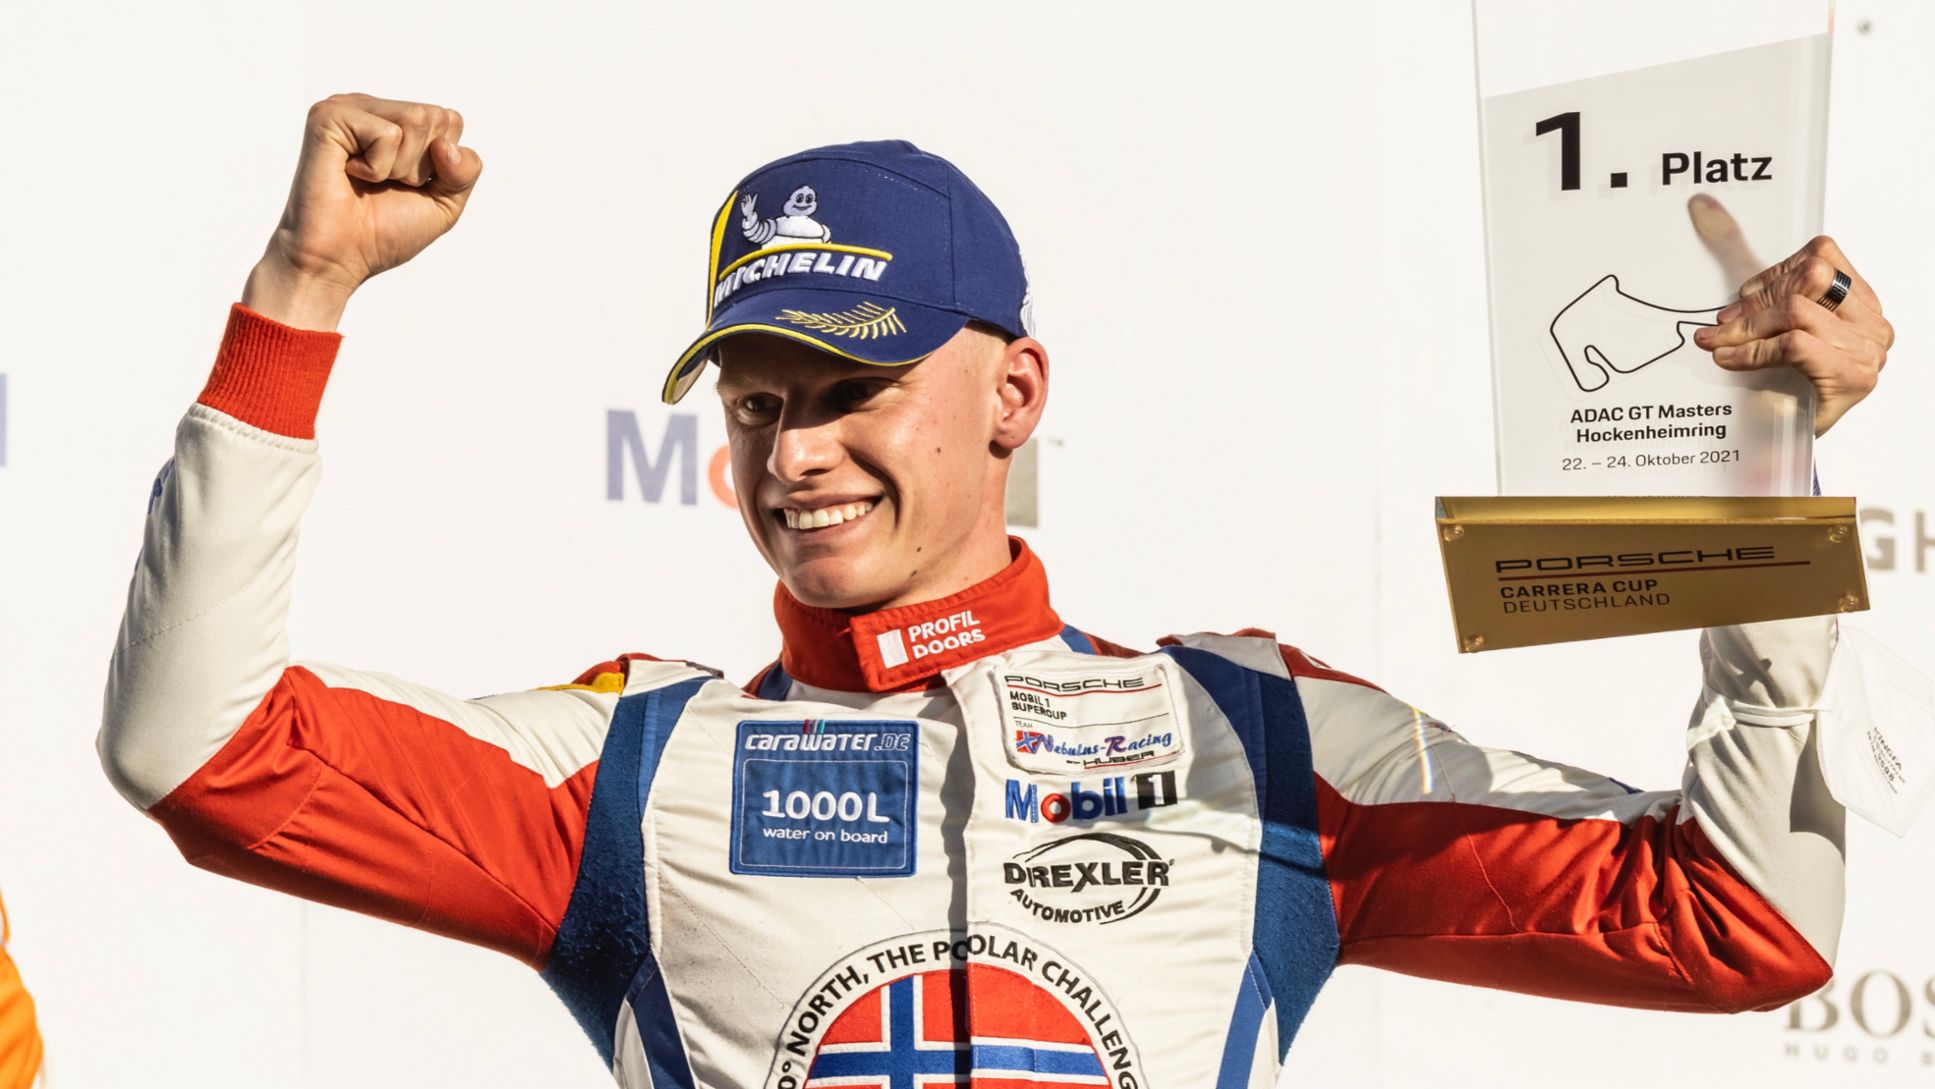 Second win of the season for Köhler, Hartog secures rookie class title - Image 1